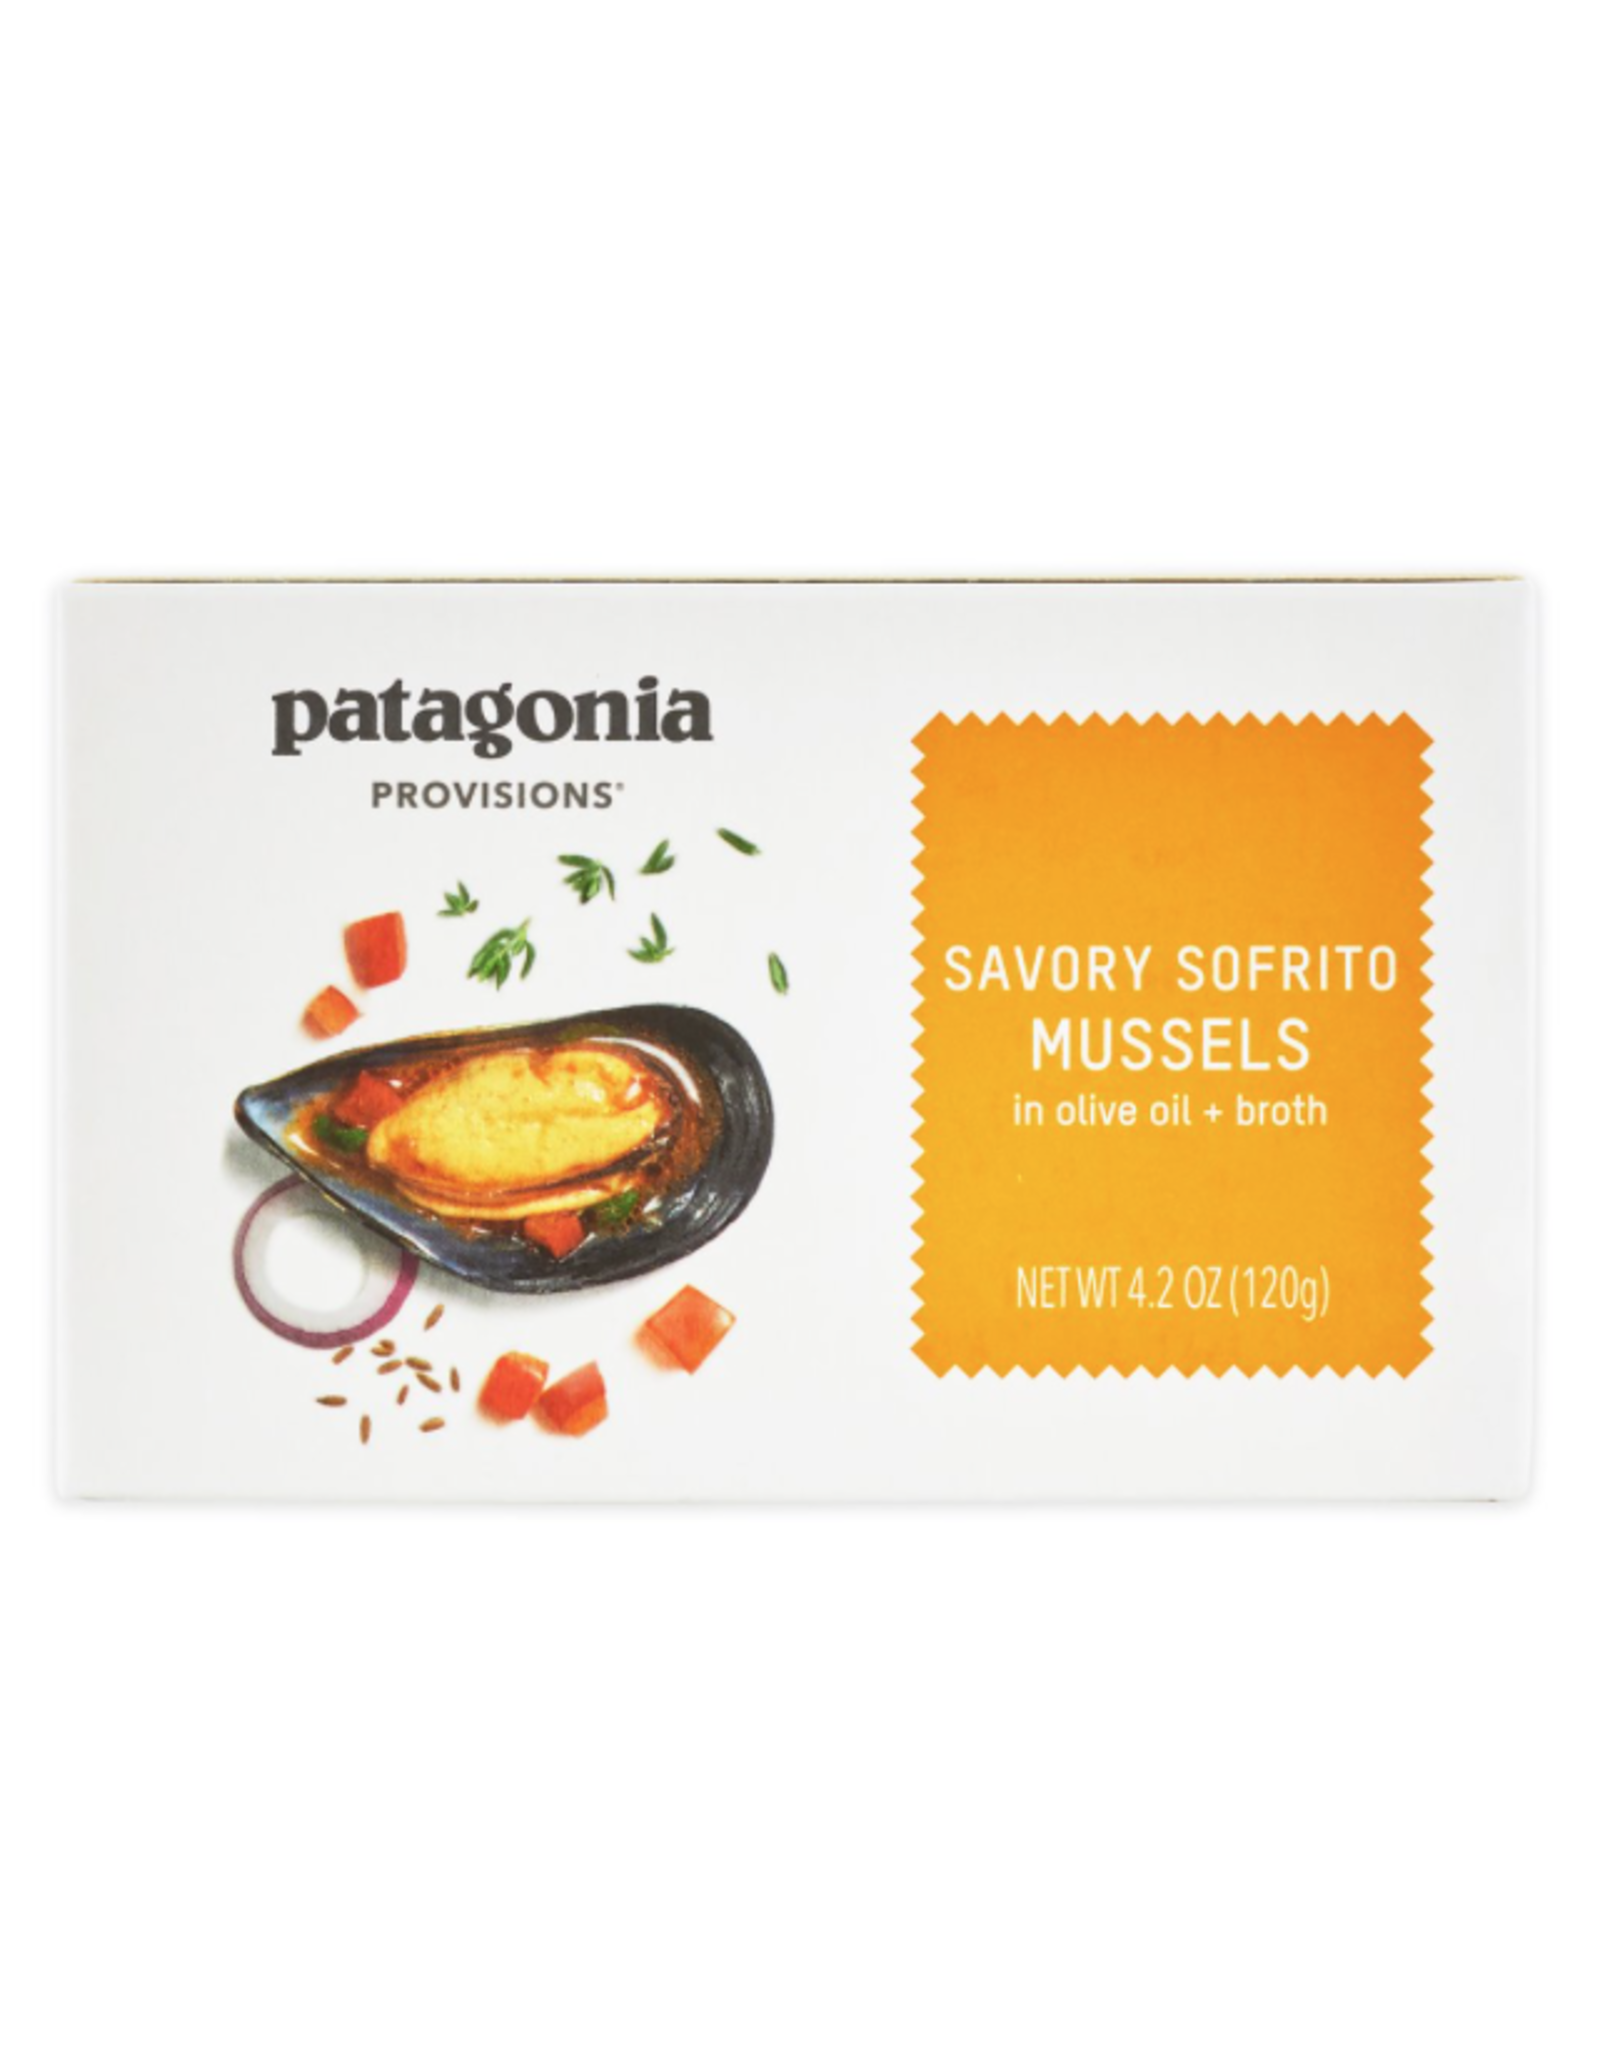 Patagonia Provisions Savory Sofrito Mussels